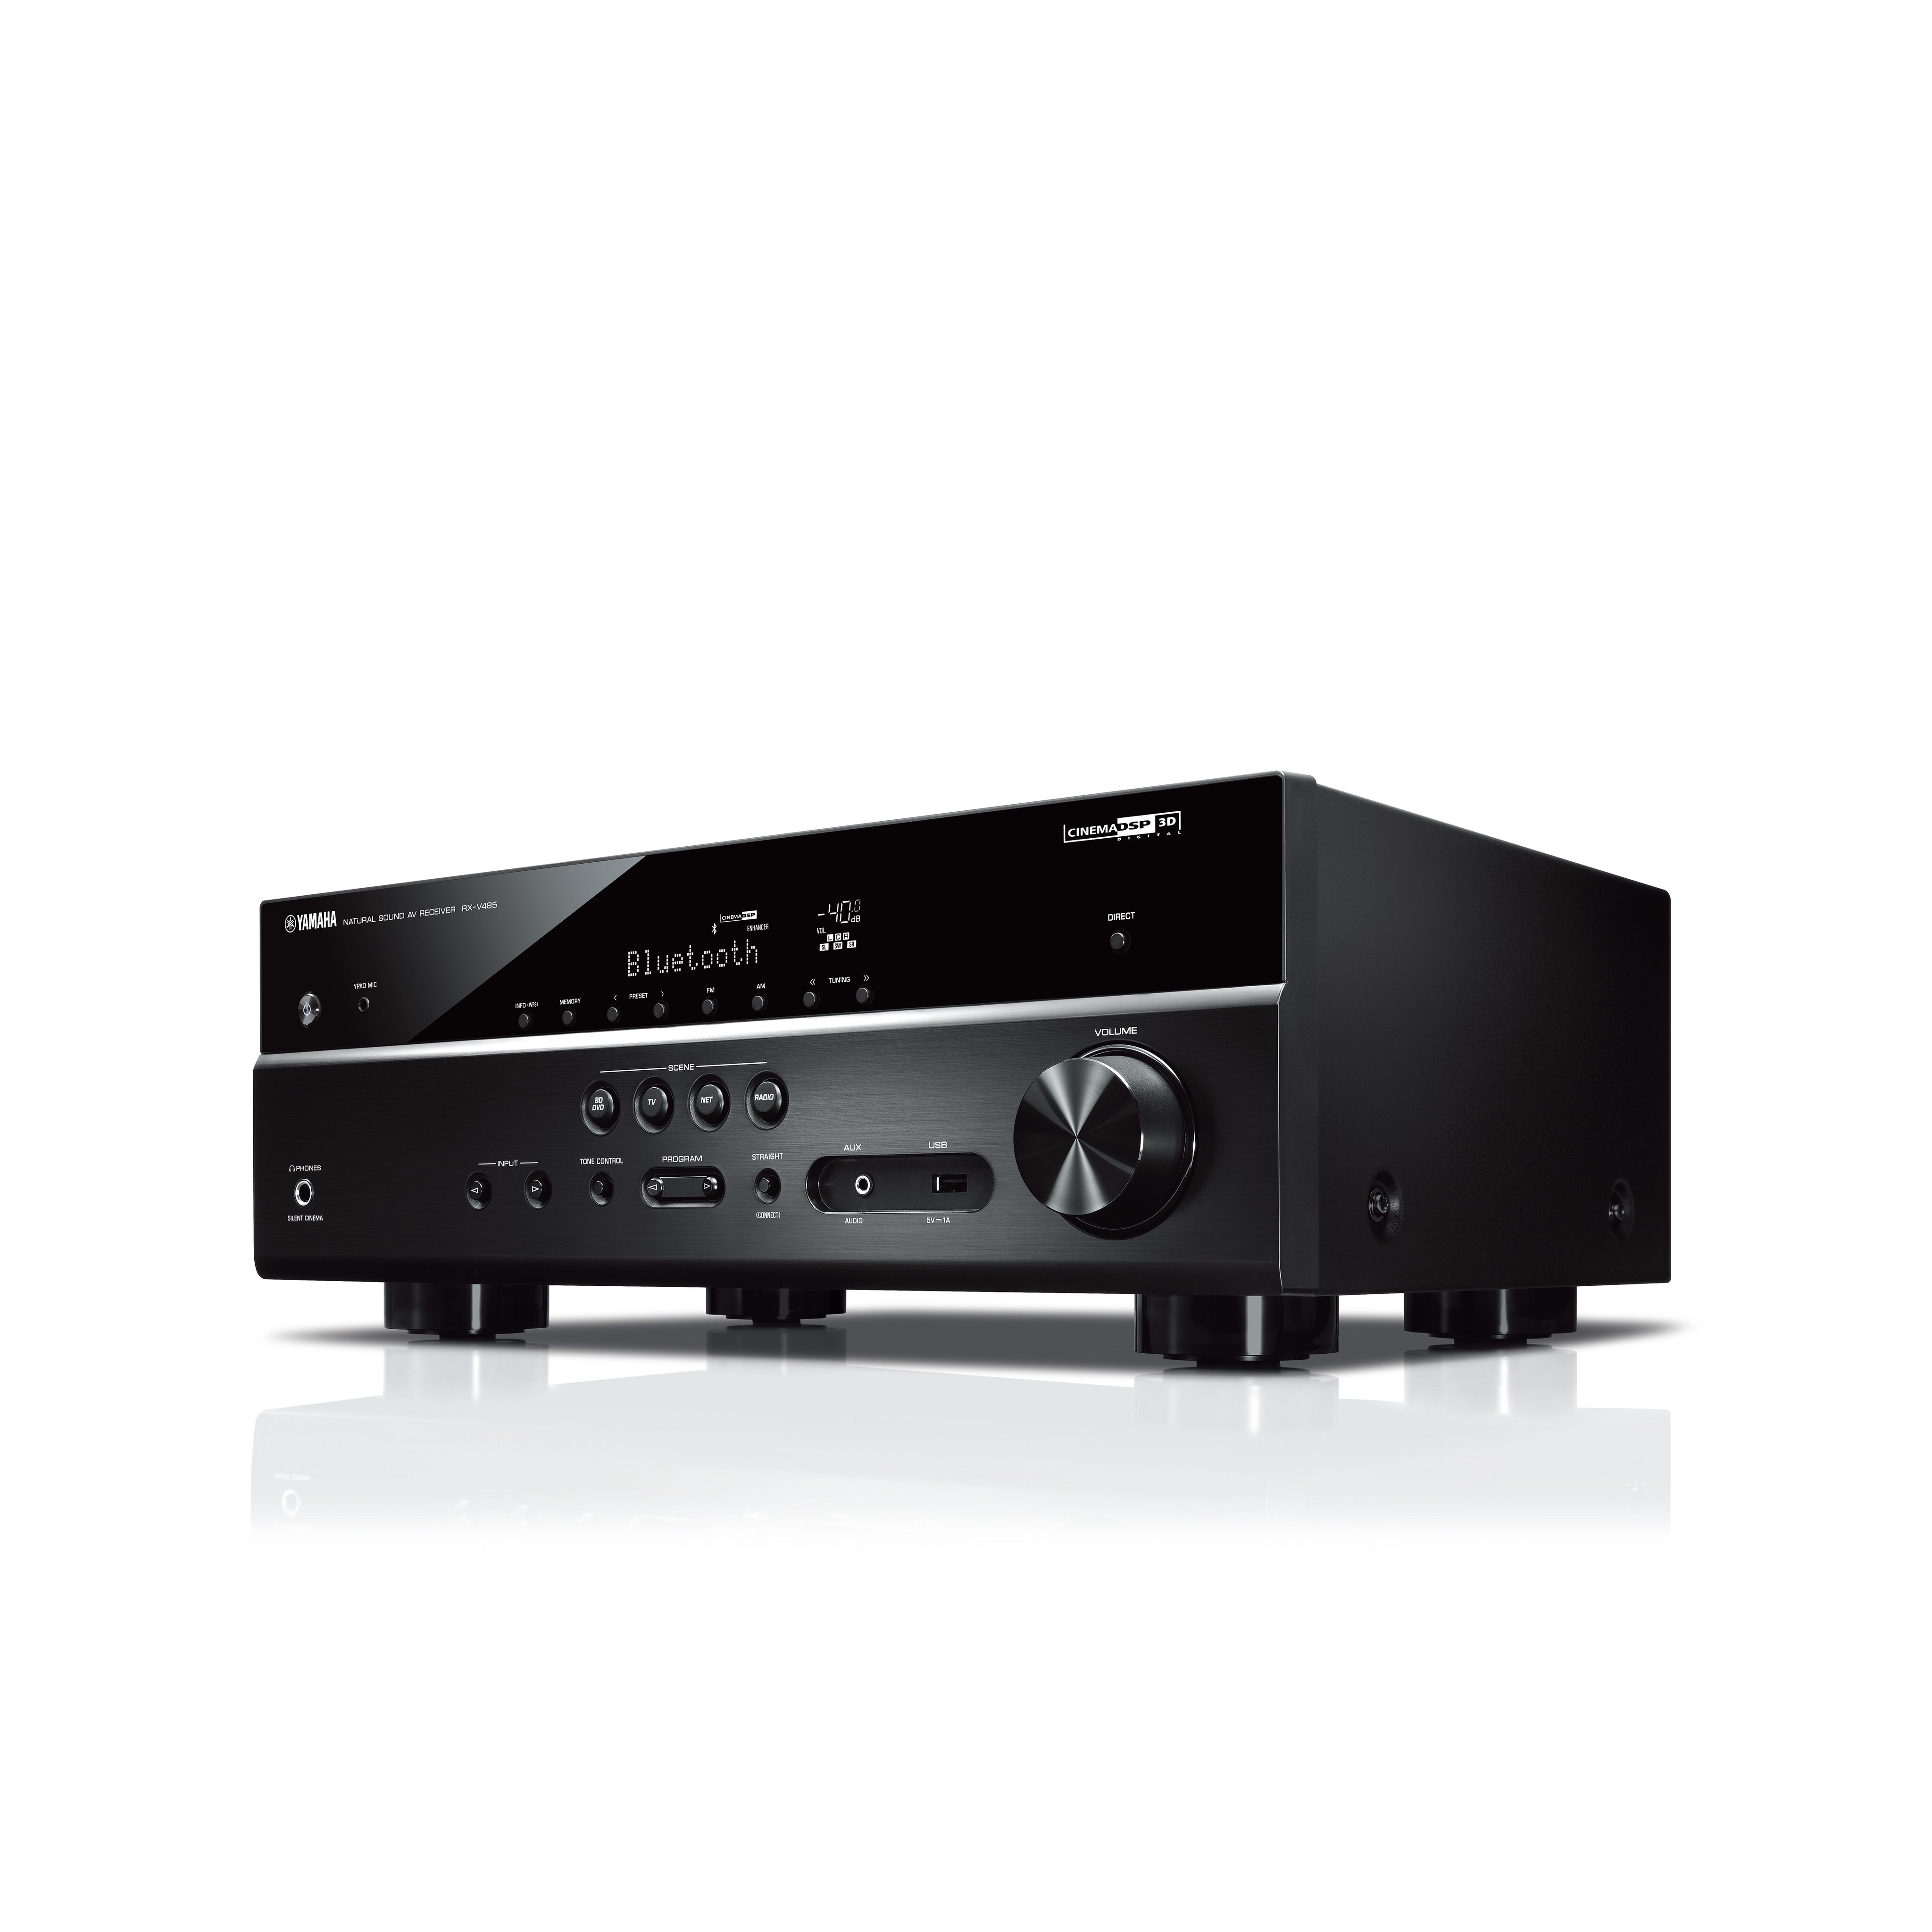 zweer droom rechtbank RX-V485 - Overview - AV Receivers - Audio & Visual - Products - Yamaha -  Other European Countries